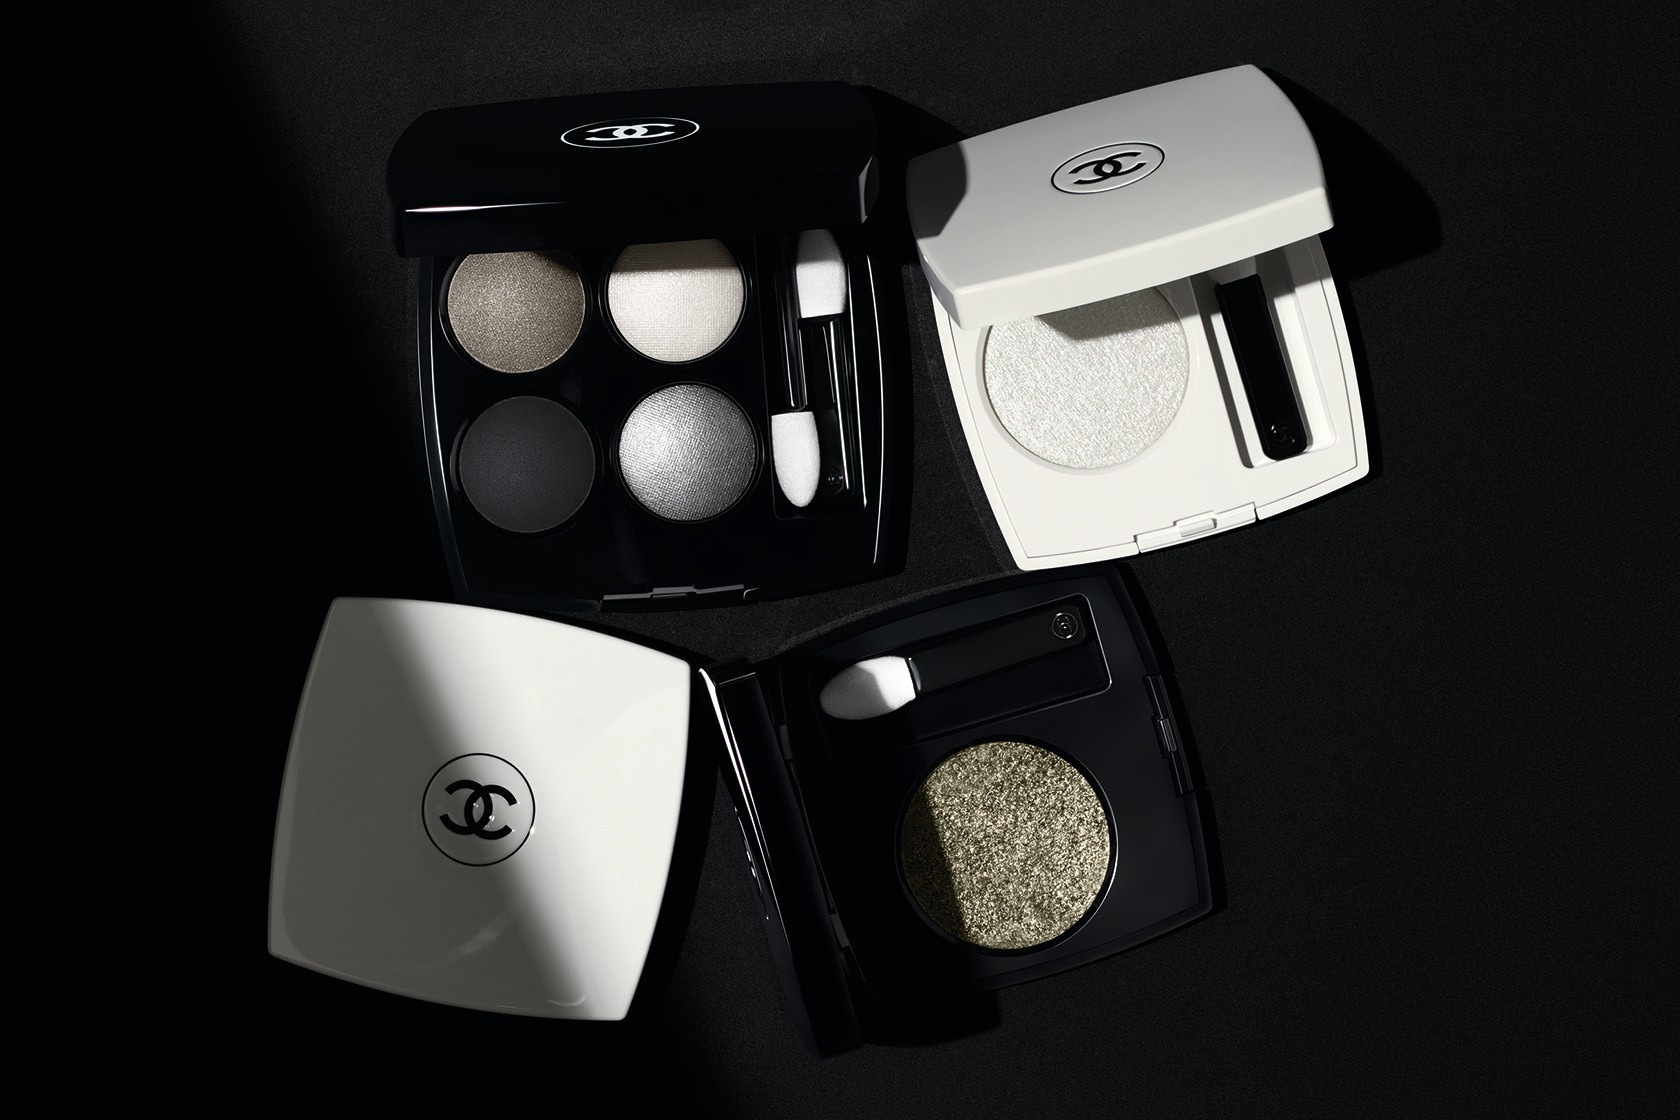 Here's a look at Chanel Beauty 's Fall 2019 'Noir Et Blanc' makeup